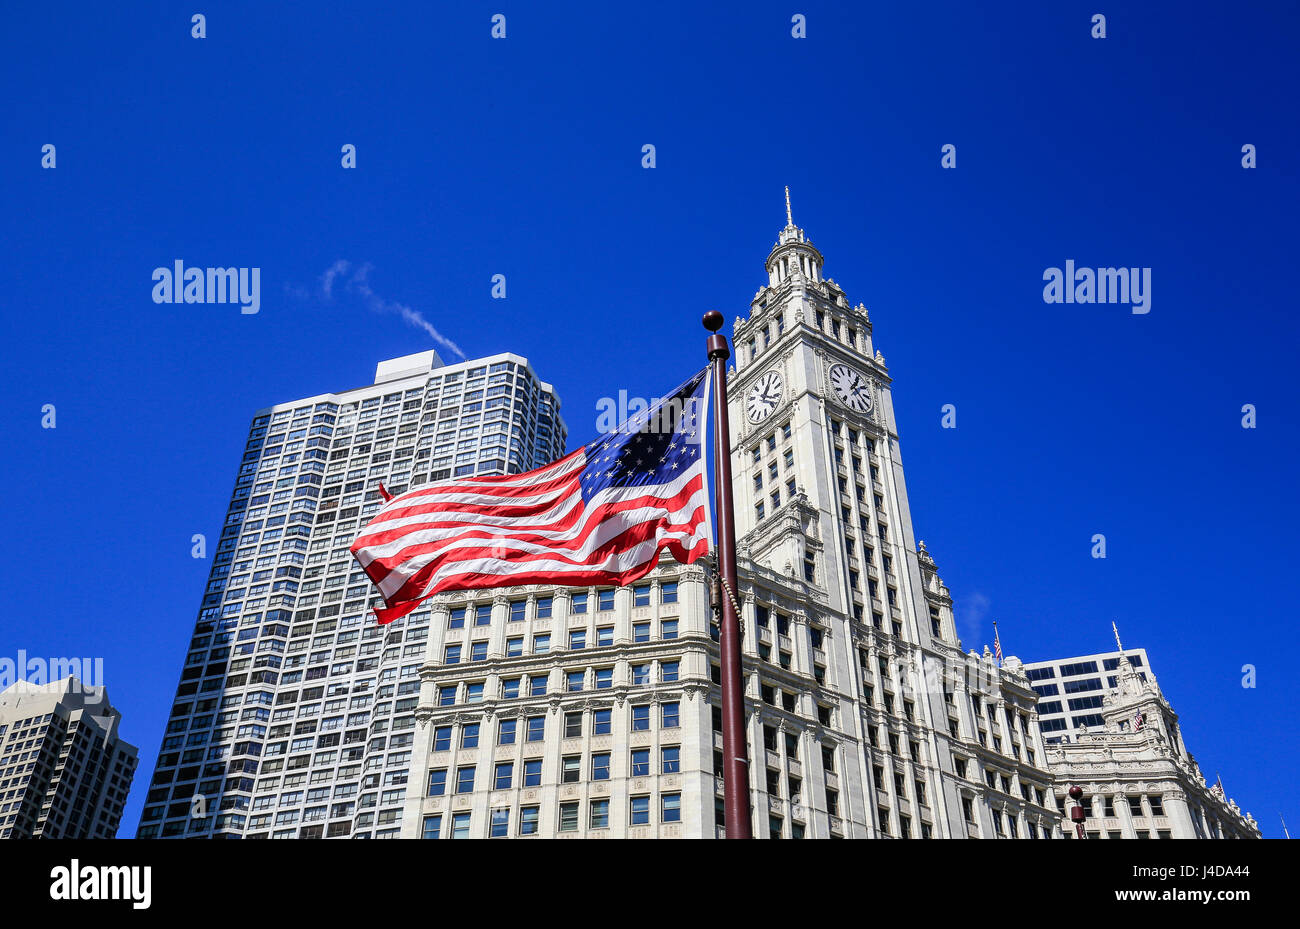 Chicago, American flag in front of Wrigley Building, Chicago, Illinois, USA, North America, Amerikanische Fahne vor Wrigley Building, Chicago, Illinoi Stock Photo